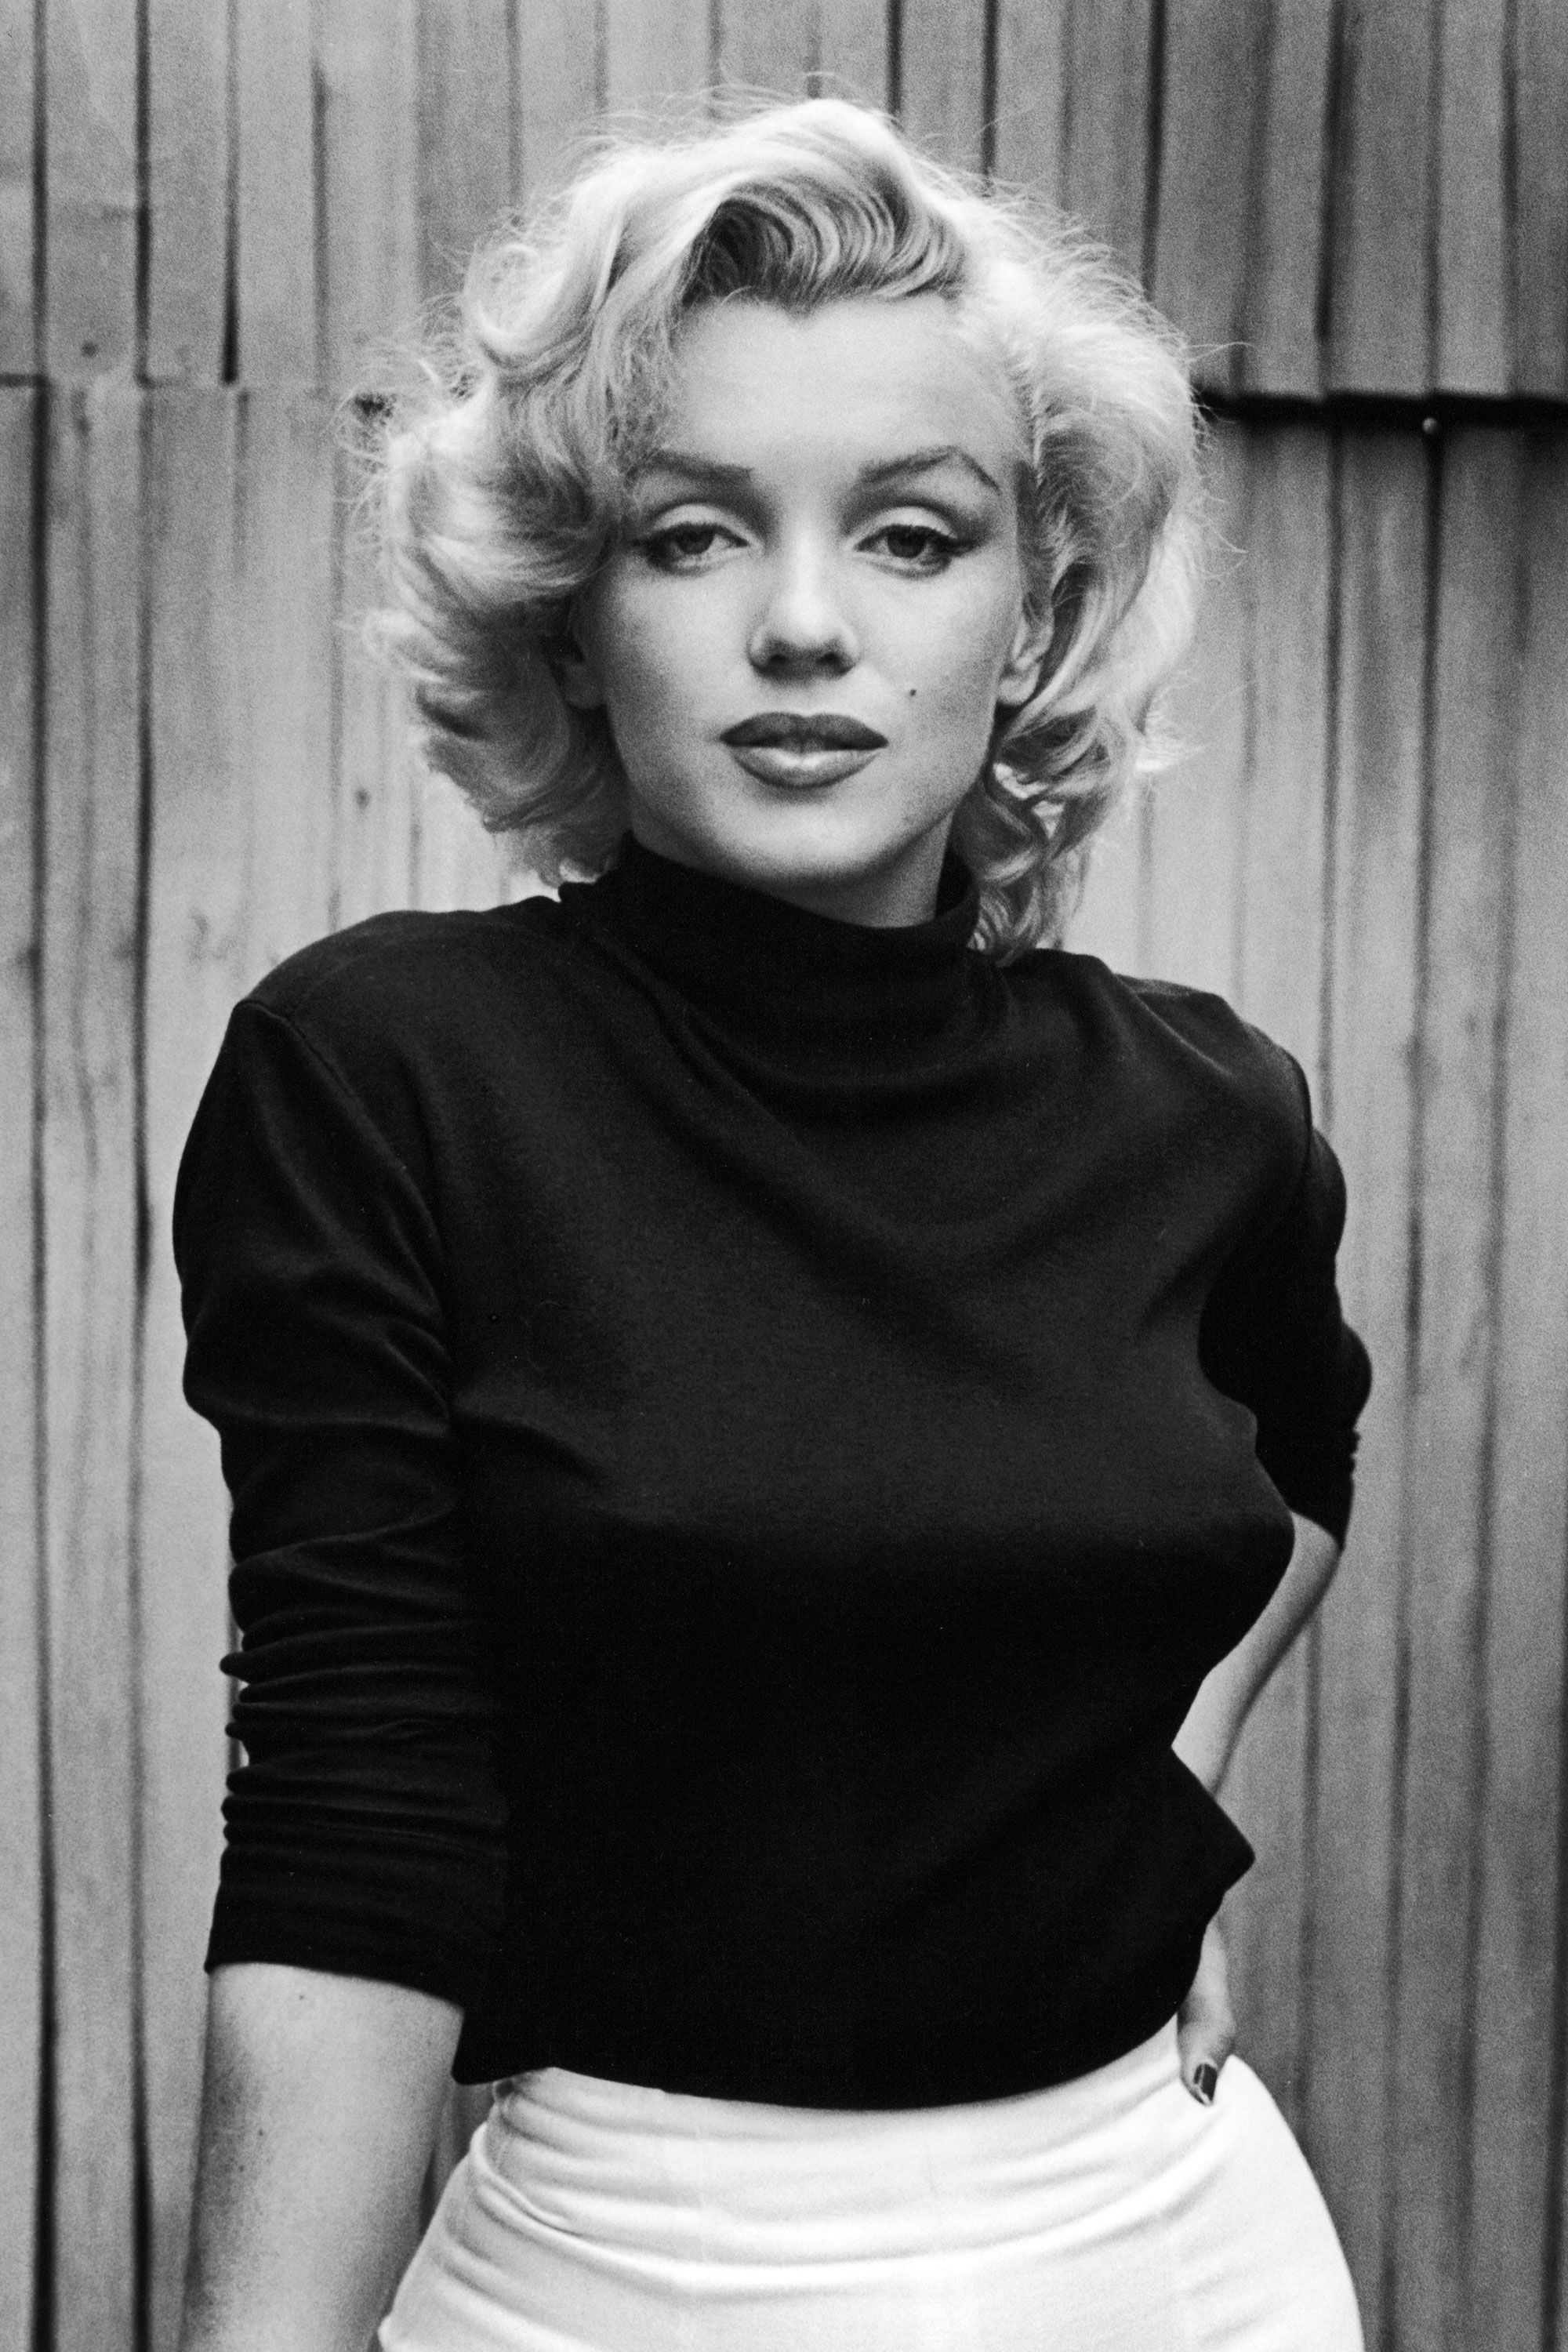 Marilyn Monroe in Pictures by Harpers Bazaar (15 of some of the most inspiring